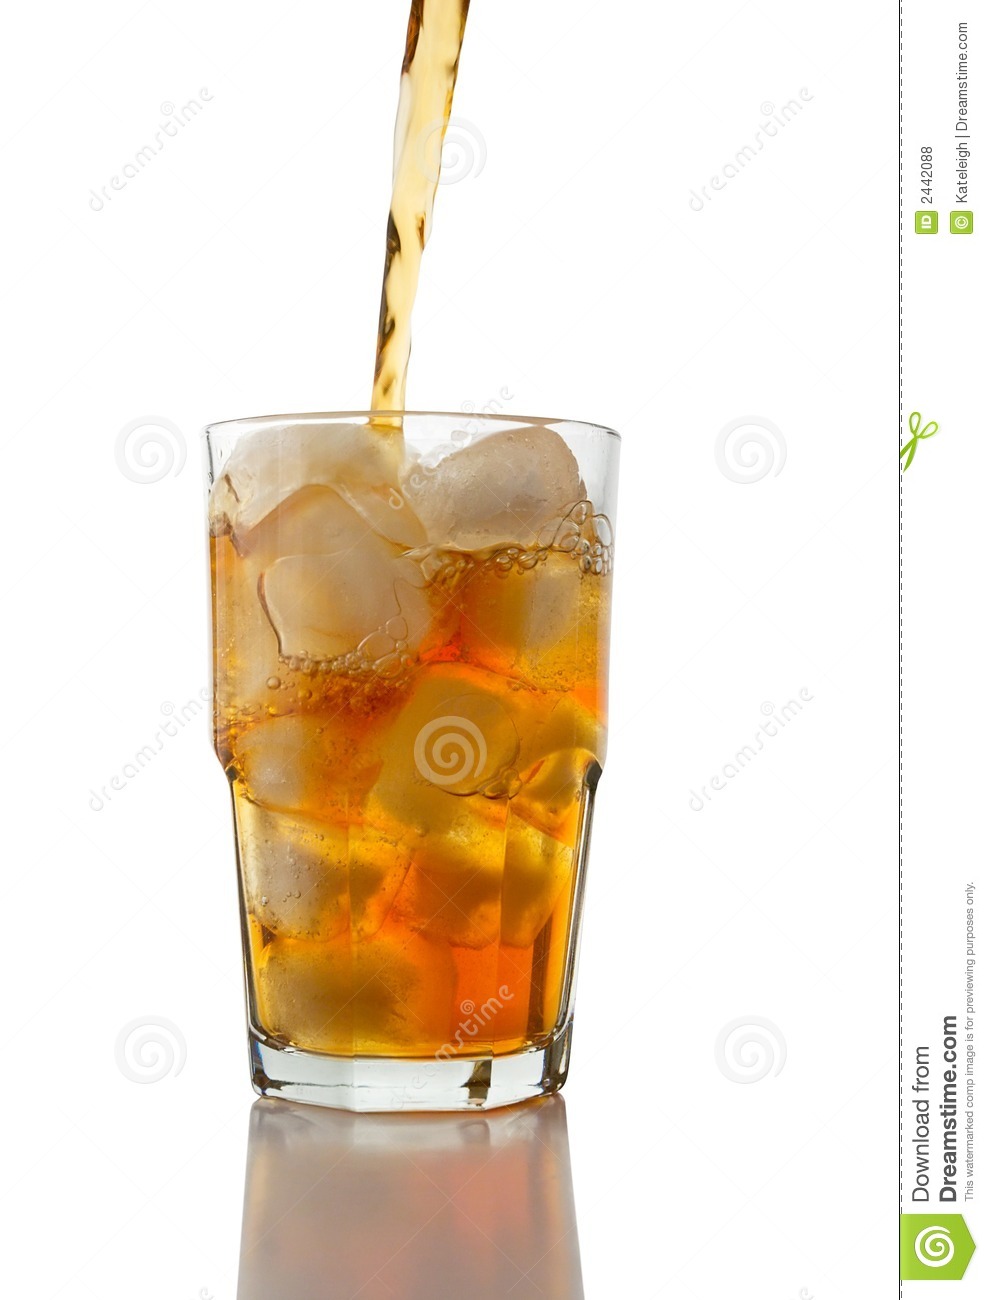 Iced Tea Pouring Into A Glass Of Ice On A White Background   Clipping